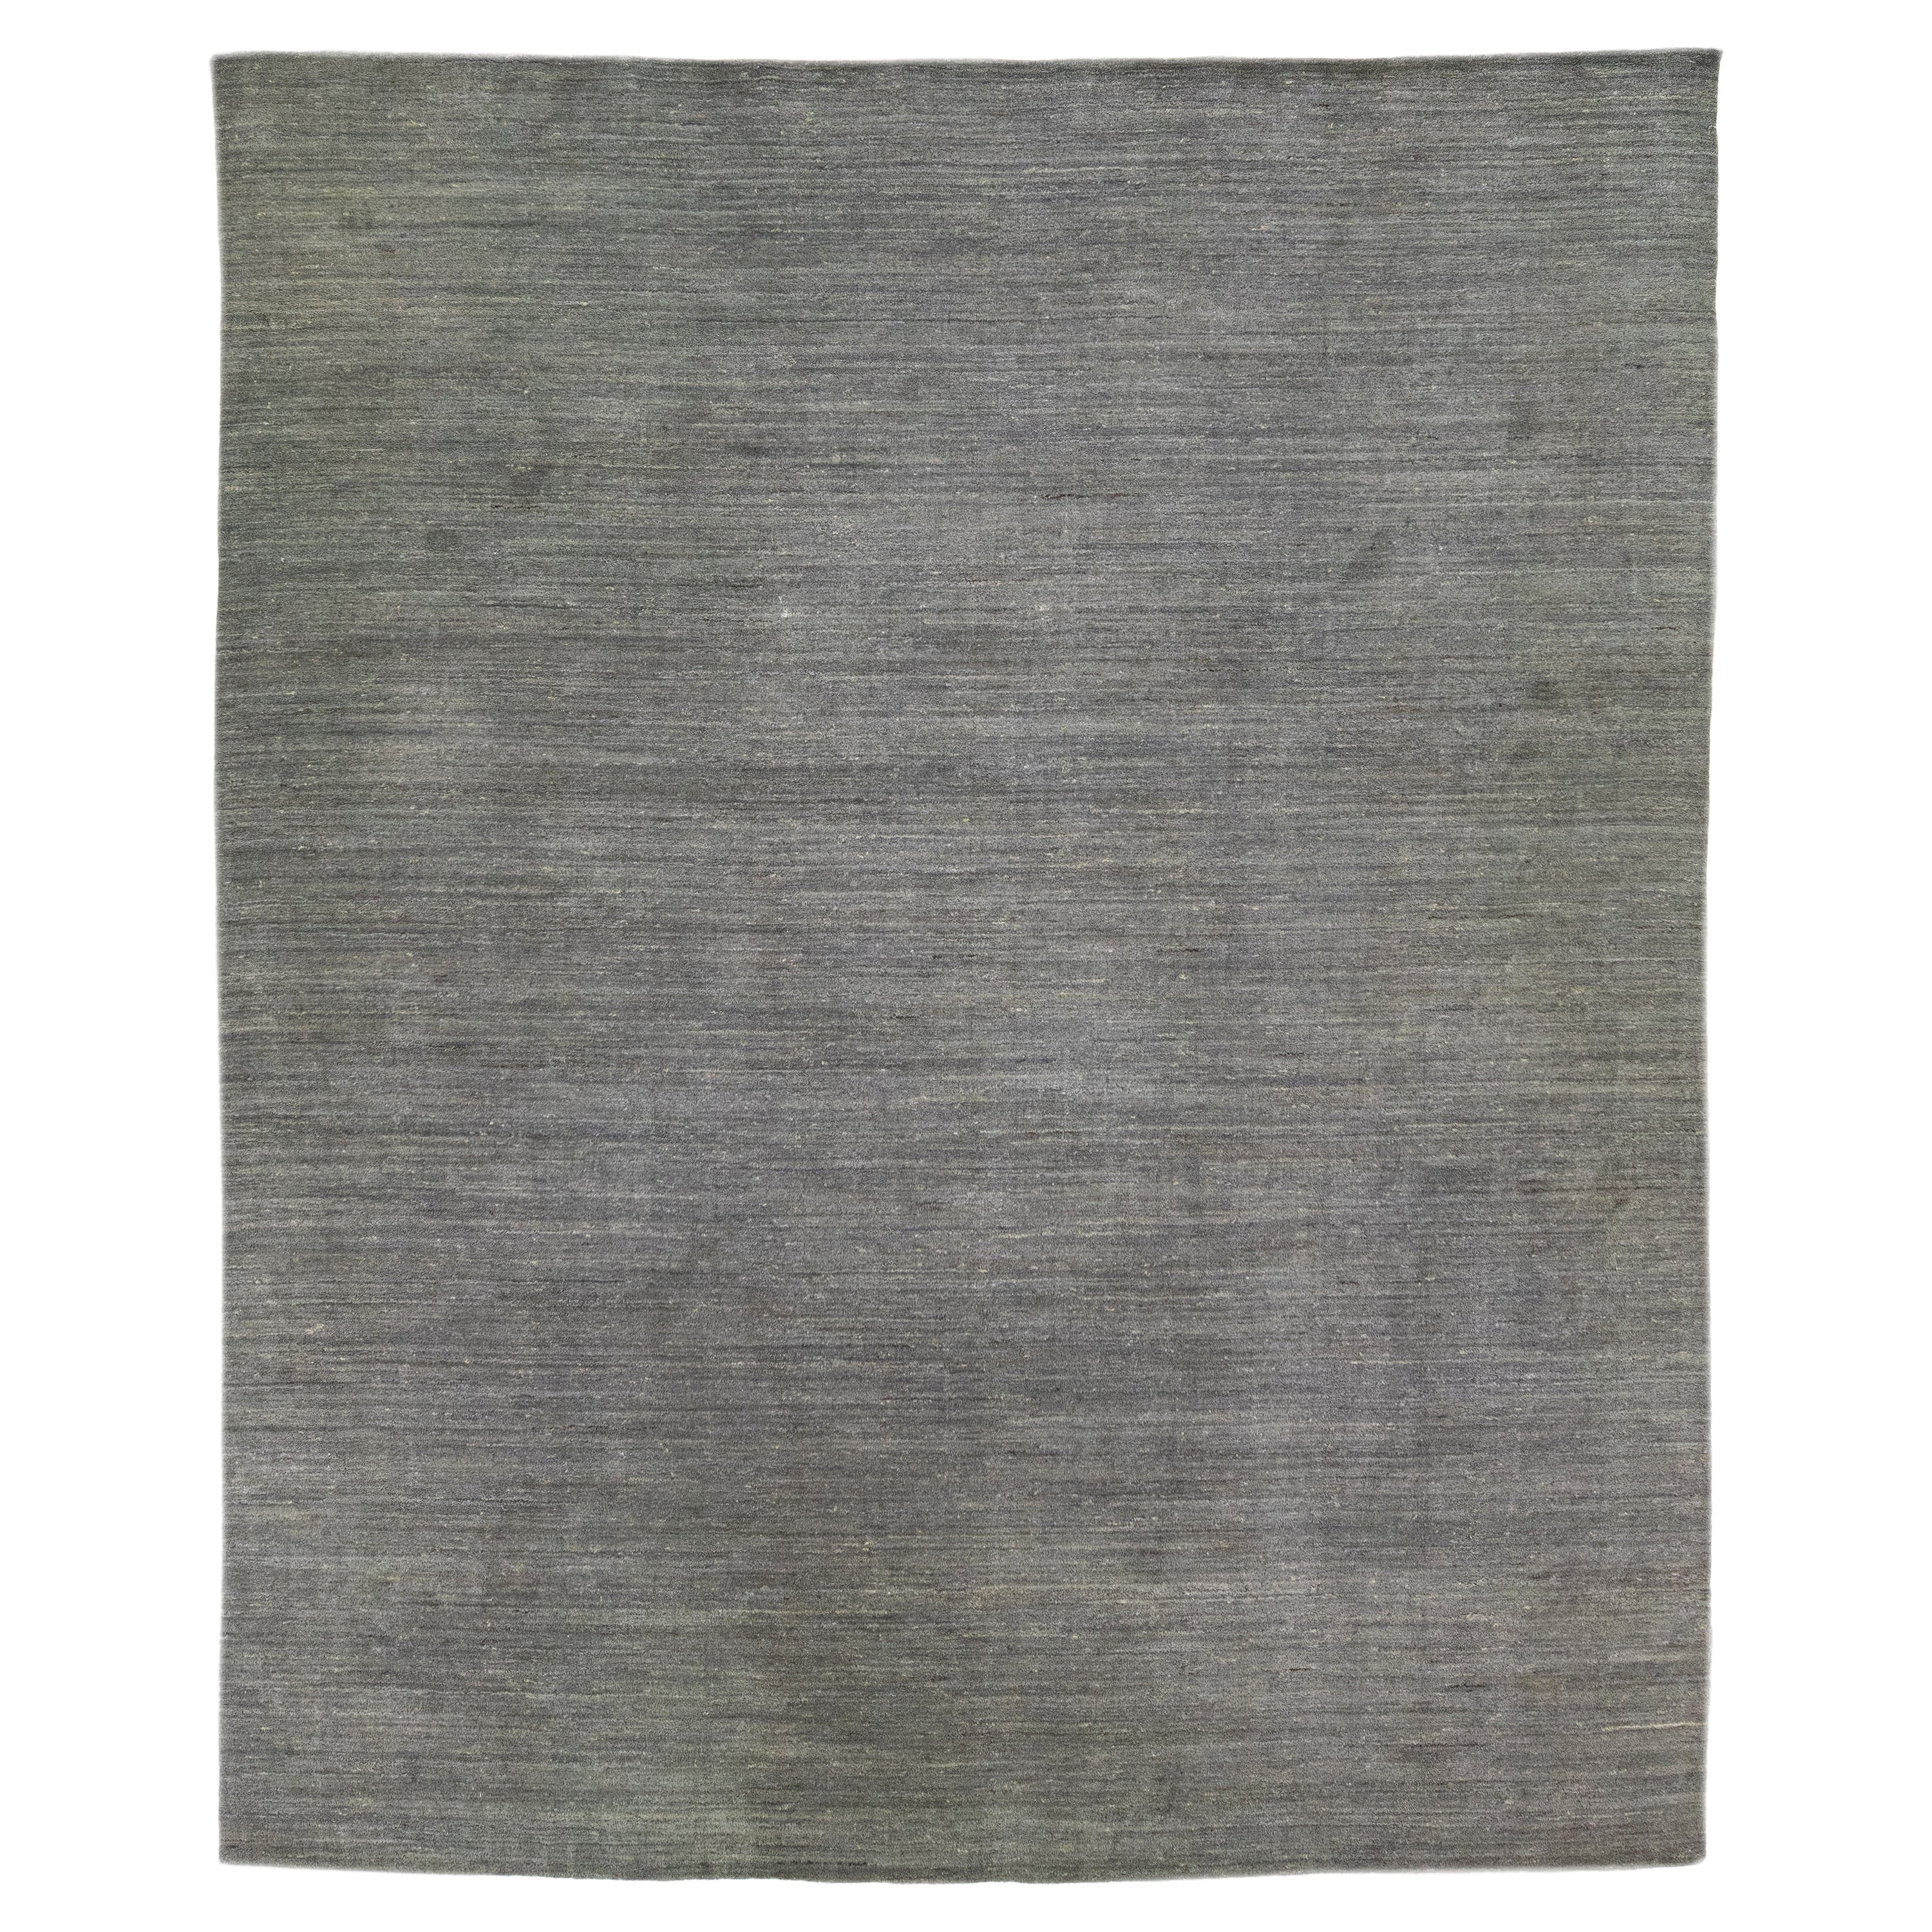 Modern Gabbeh Style Gray Handmade Oversize Wool Rug with Solid Design